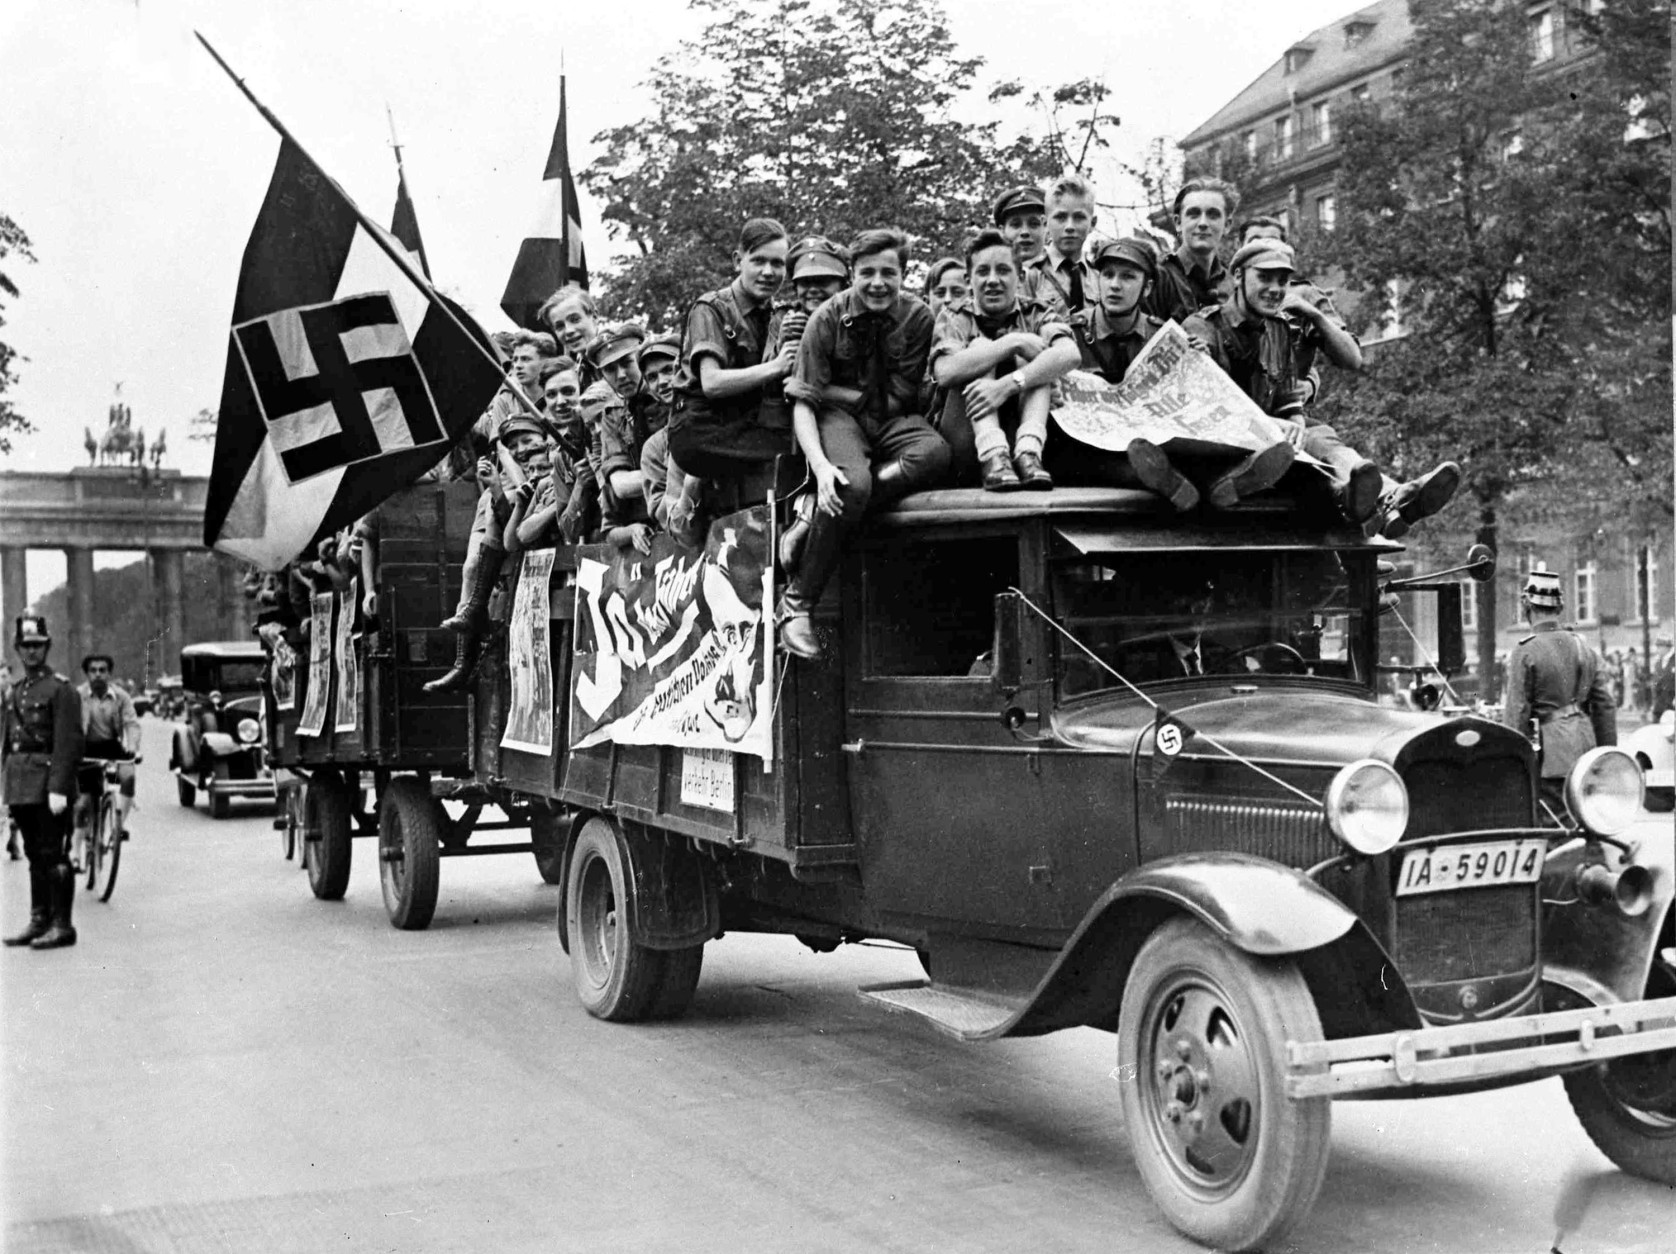 Young Nazis crowd on the back of a truck used for propoganda purposes advising people to vote 'Yes' in the great plebiscite as to whether Adolf Hitler should be elected President, in Berlin, Germany, Aug. 19, 1934. (AP Photo)